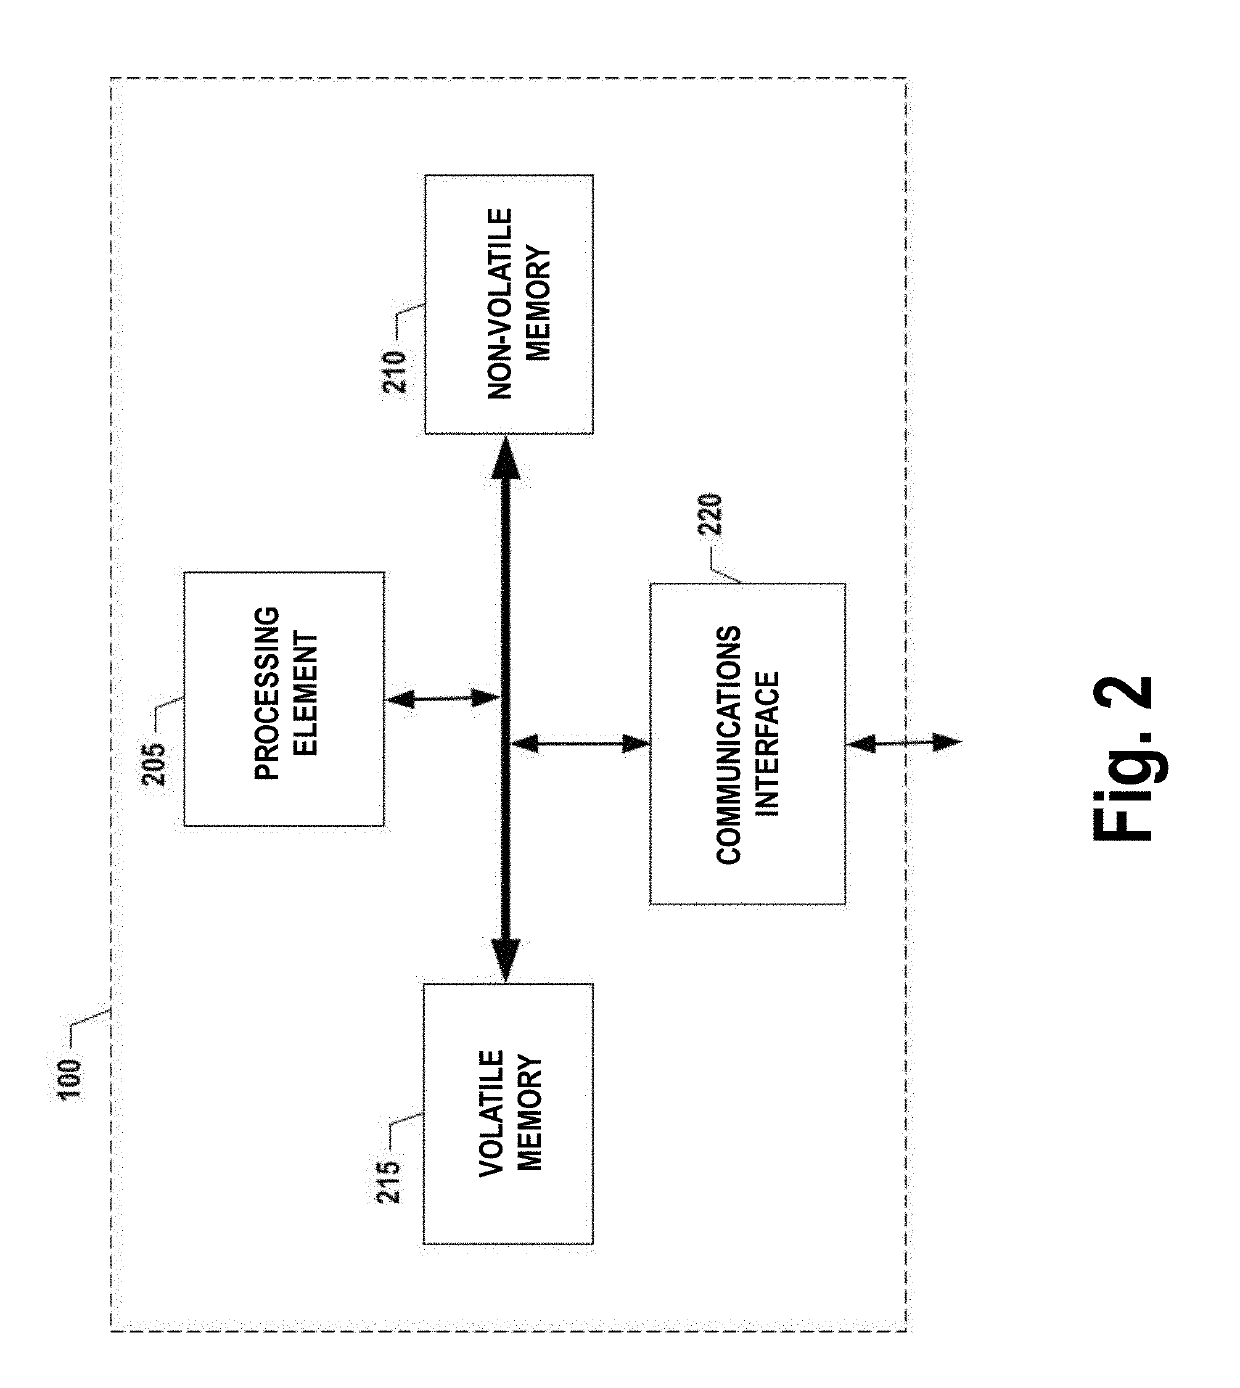 Automated occupant tracking systems and methods